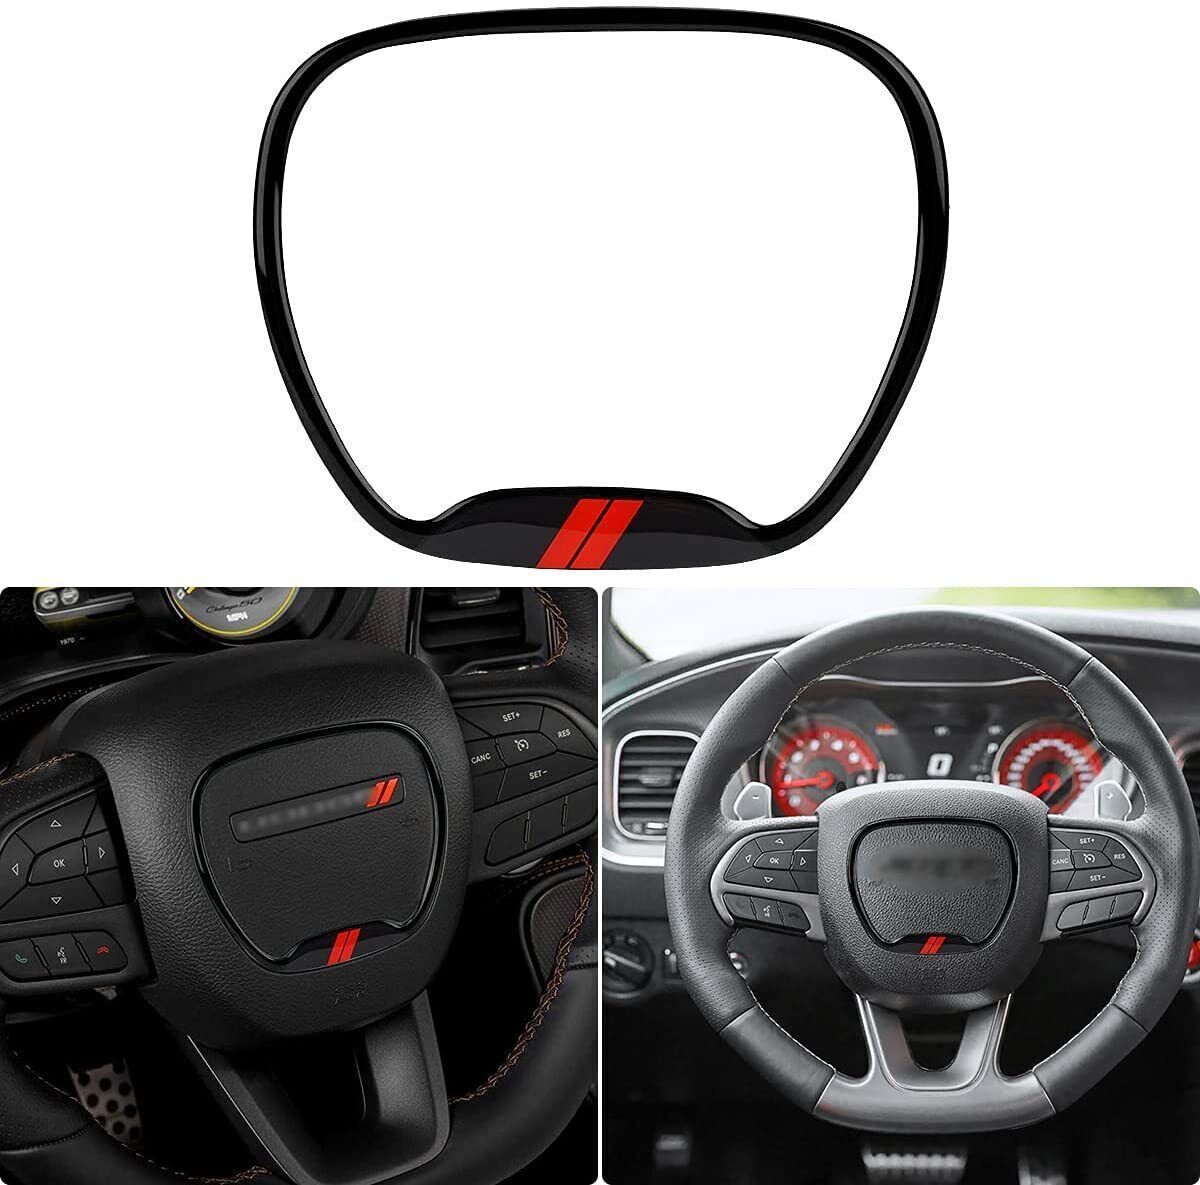 Steering Wheel Trim Cover Fits For Dodge Challenger Charger Durango 2015+ Black